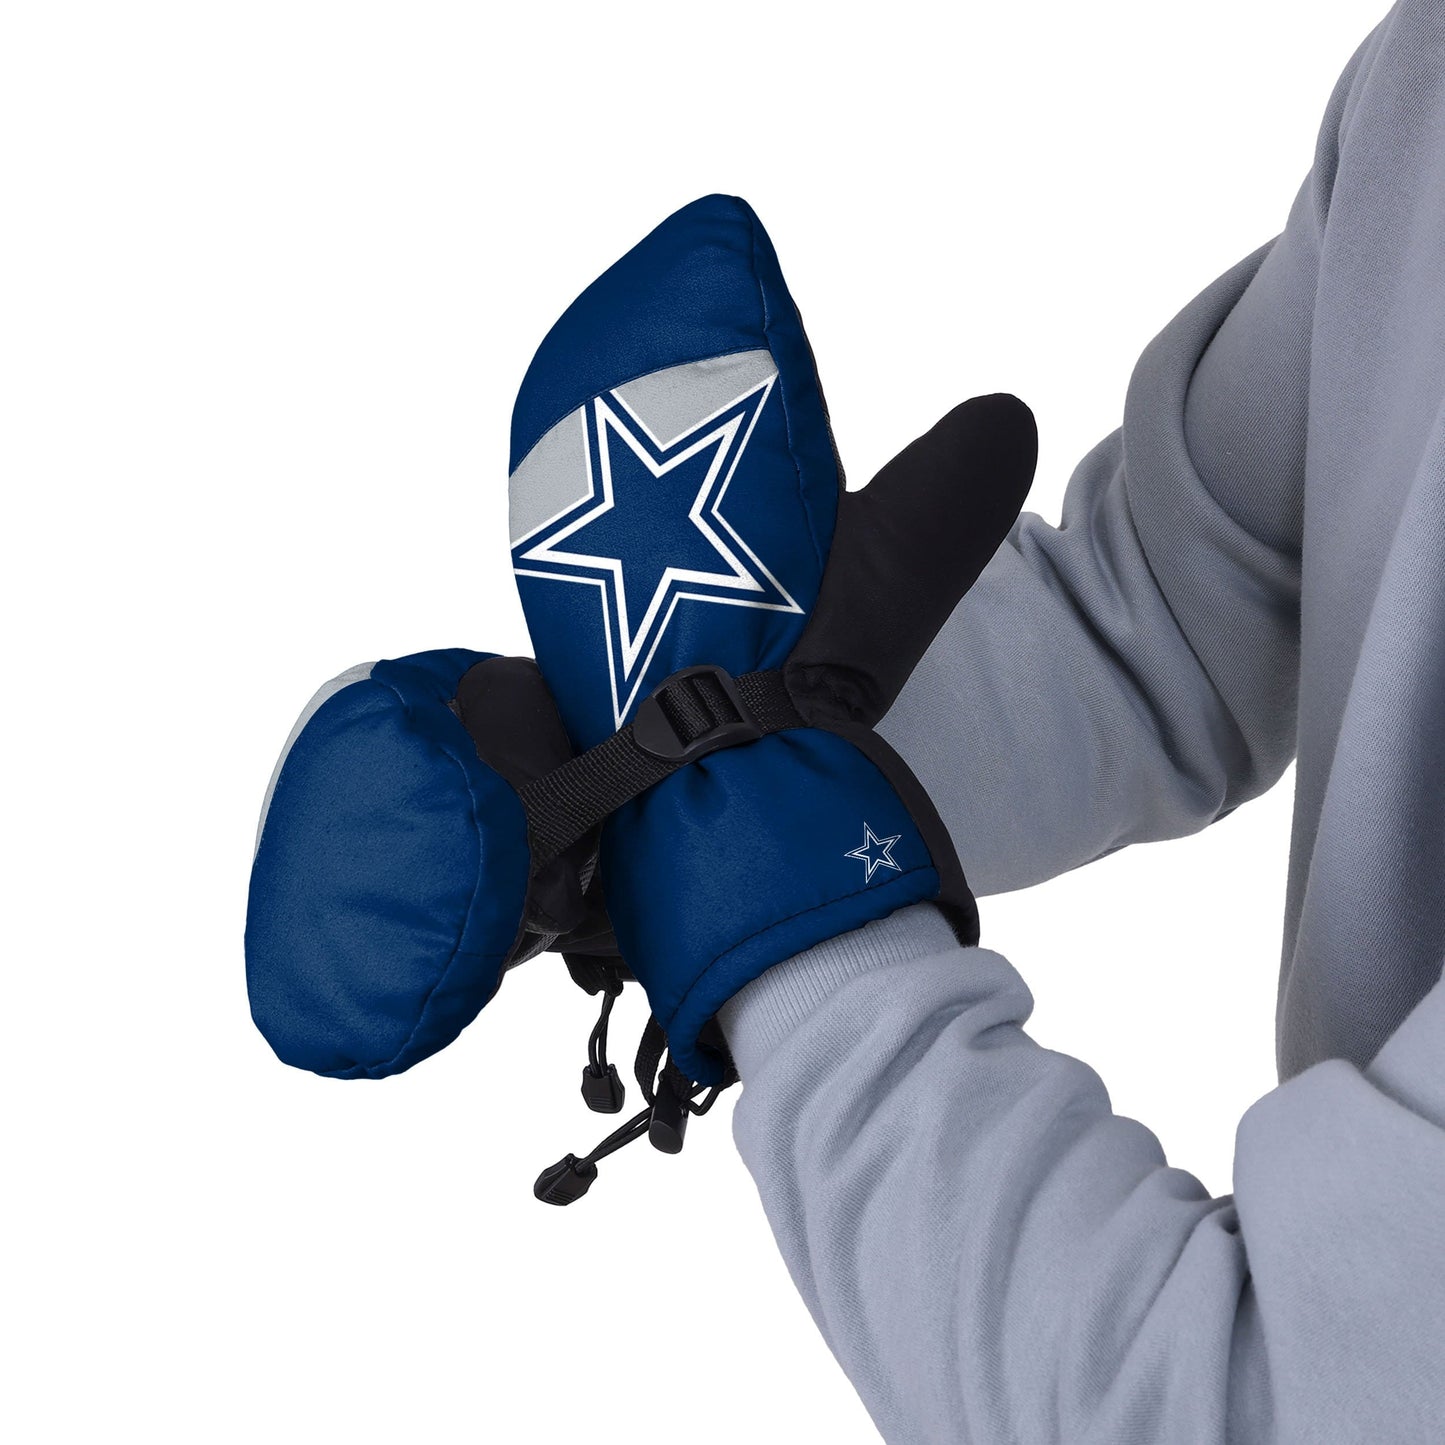 Dallas Cowboys NFL Frozen Tundra Insulated Mittens